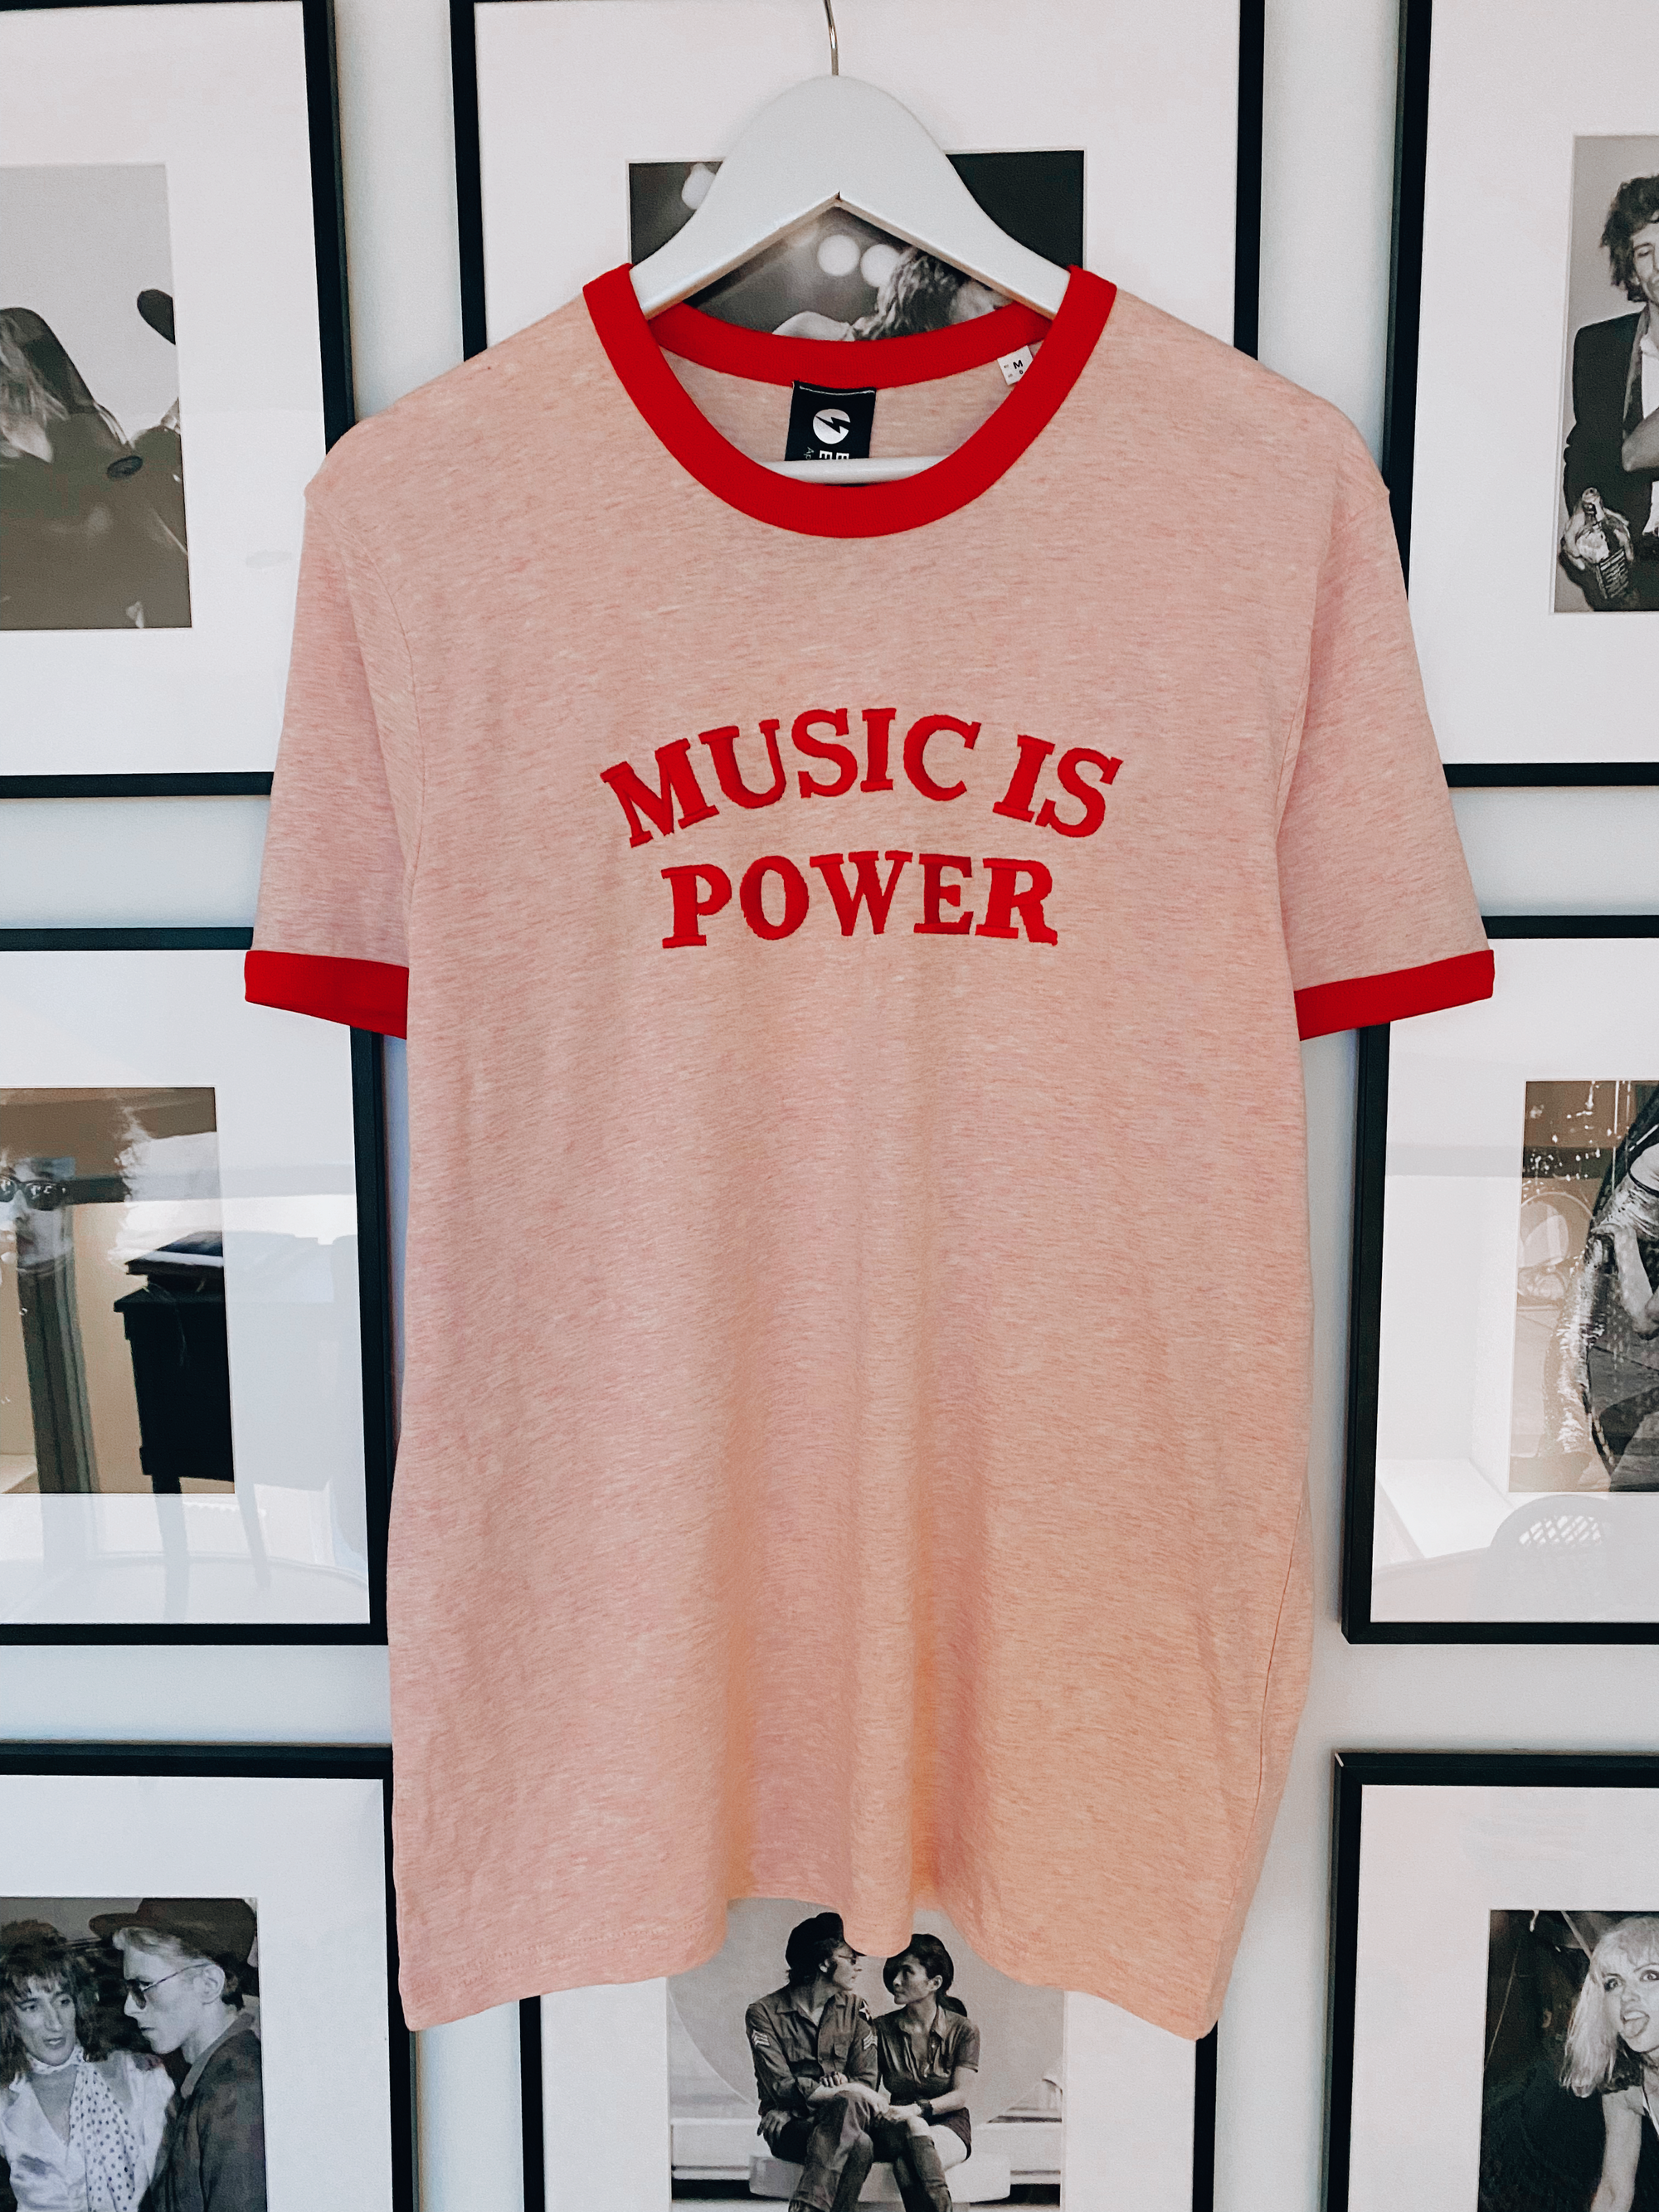 LIMITED AVAILABILITY ‘MUSIC IS POWER’ EMBROIDERED UNISEX 70'S STYLE ORGANIC COTTON RINGER T-SHIRT